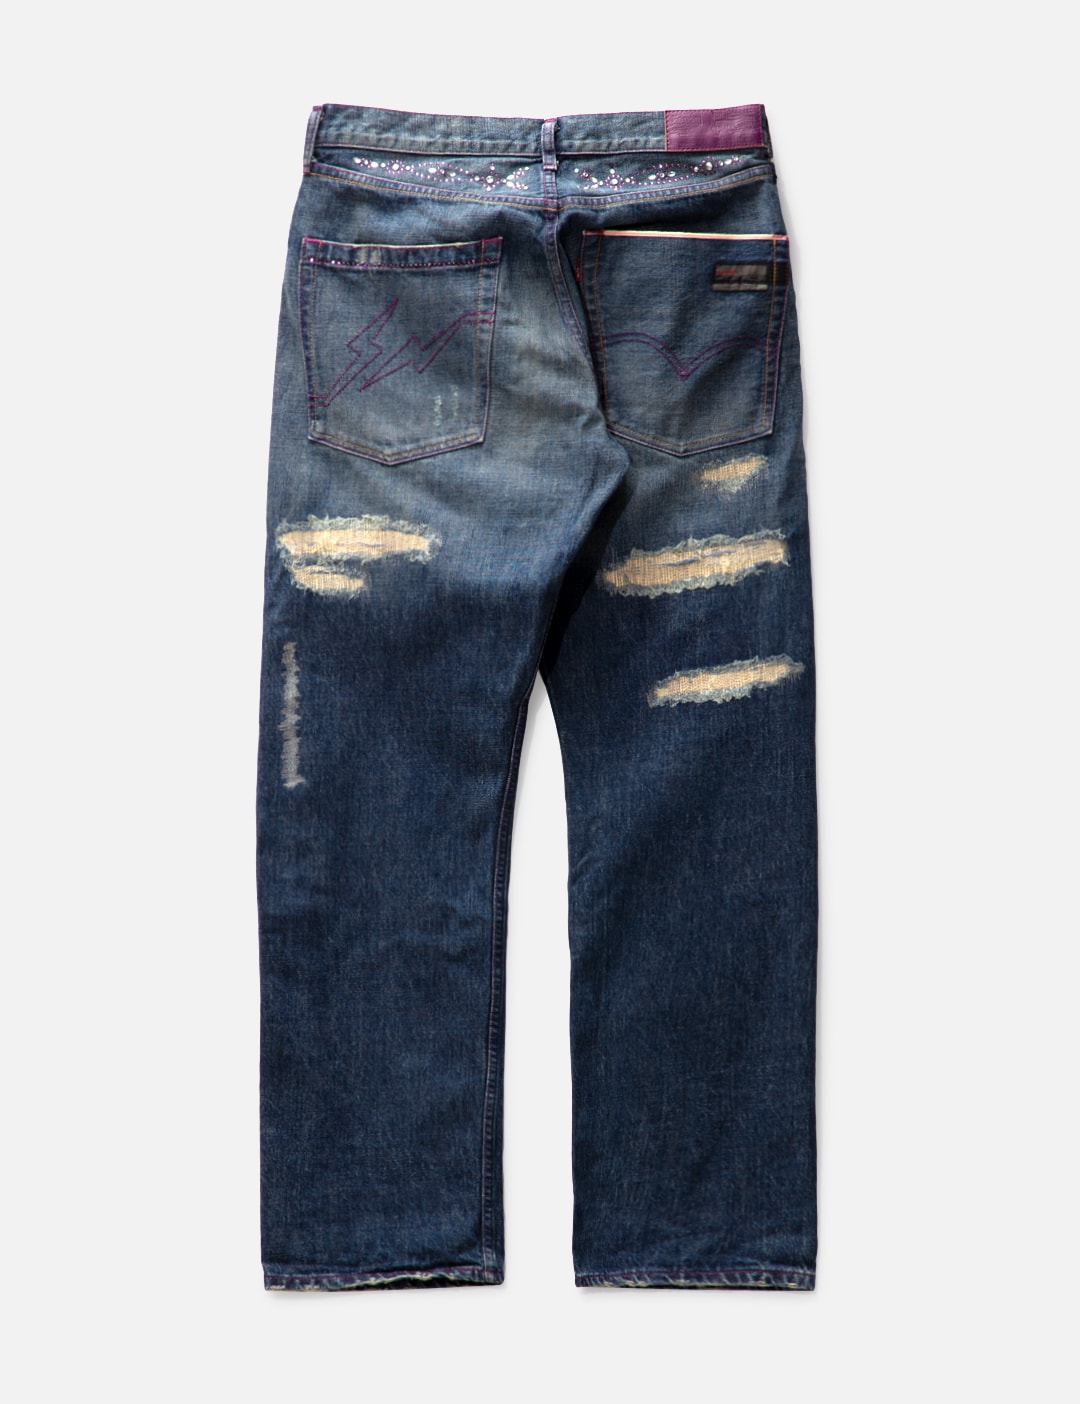 Levi's - Levi's Fenom x Fragment Design Disco Denim Pants | HBX - Globally  Curated Fashion and Lifestyle by Hypebeast